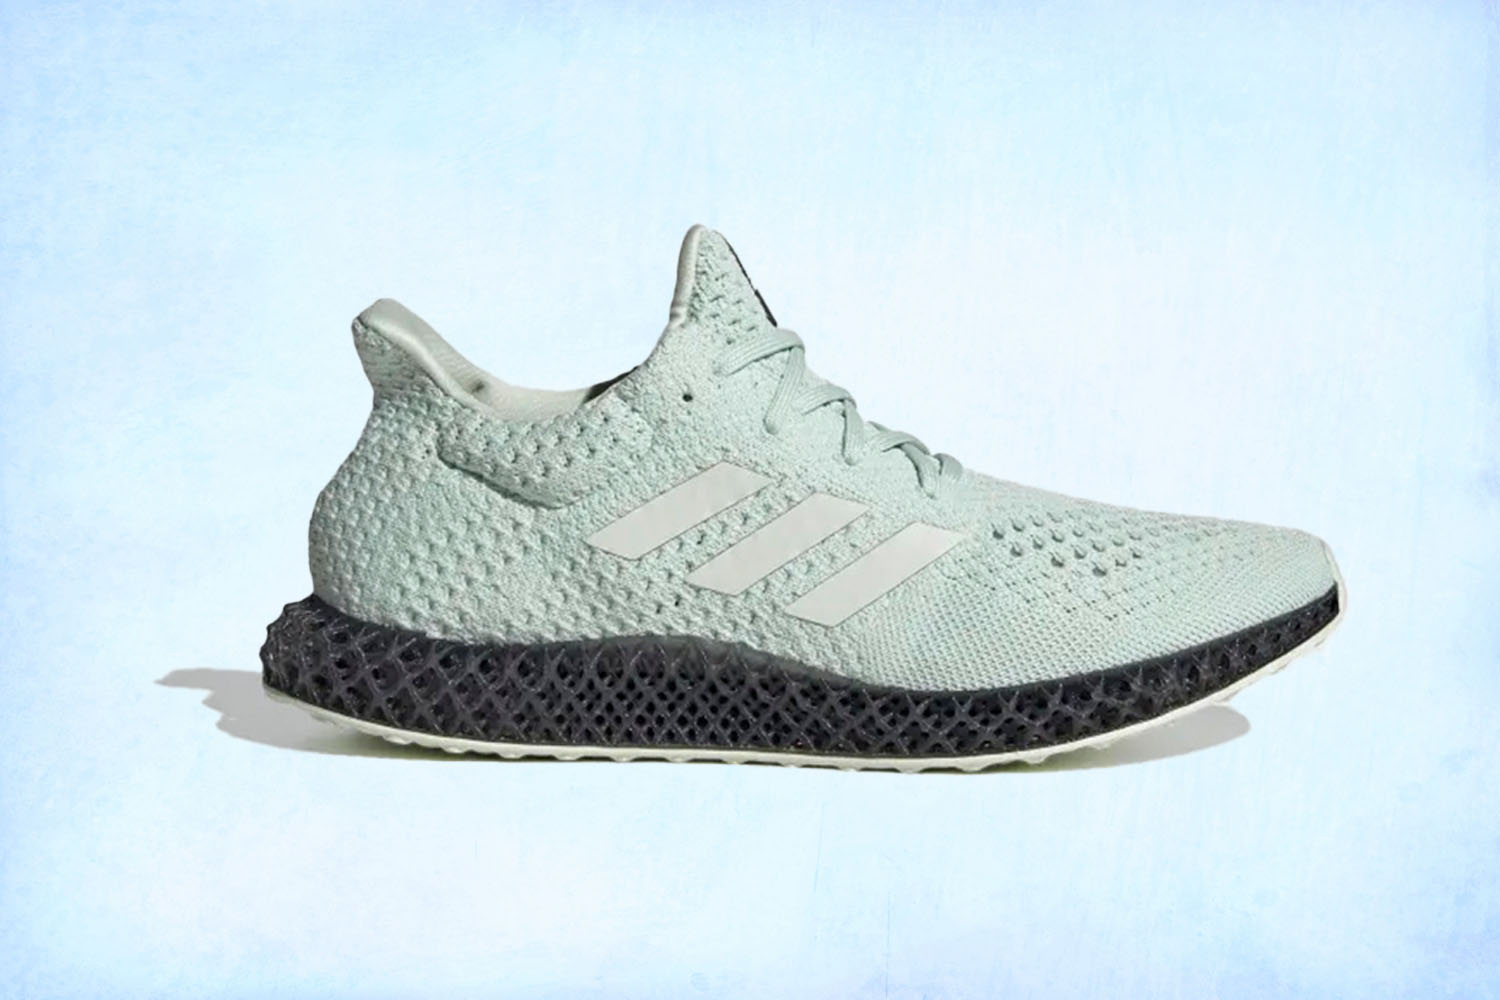 a pair of teal Adidas 4D Futurecraft sneakers on a light blue background